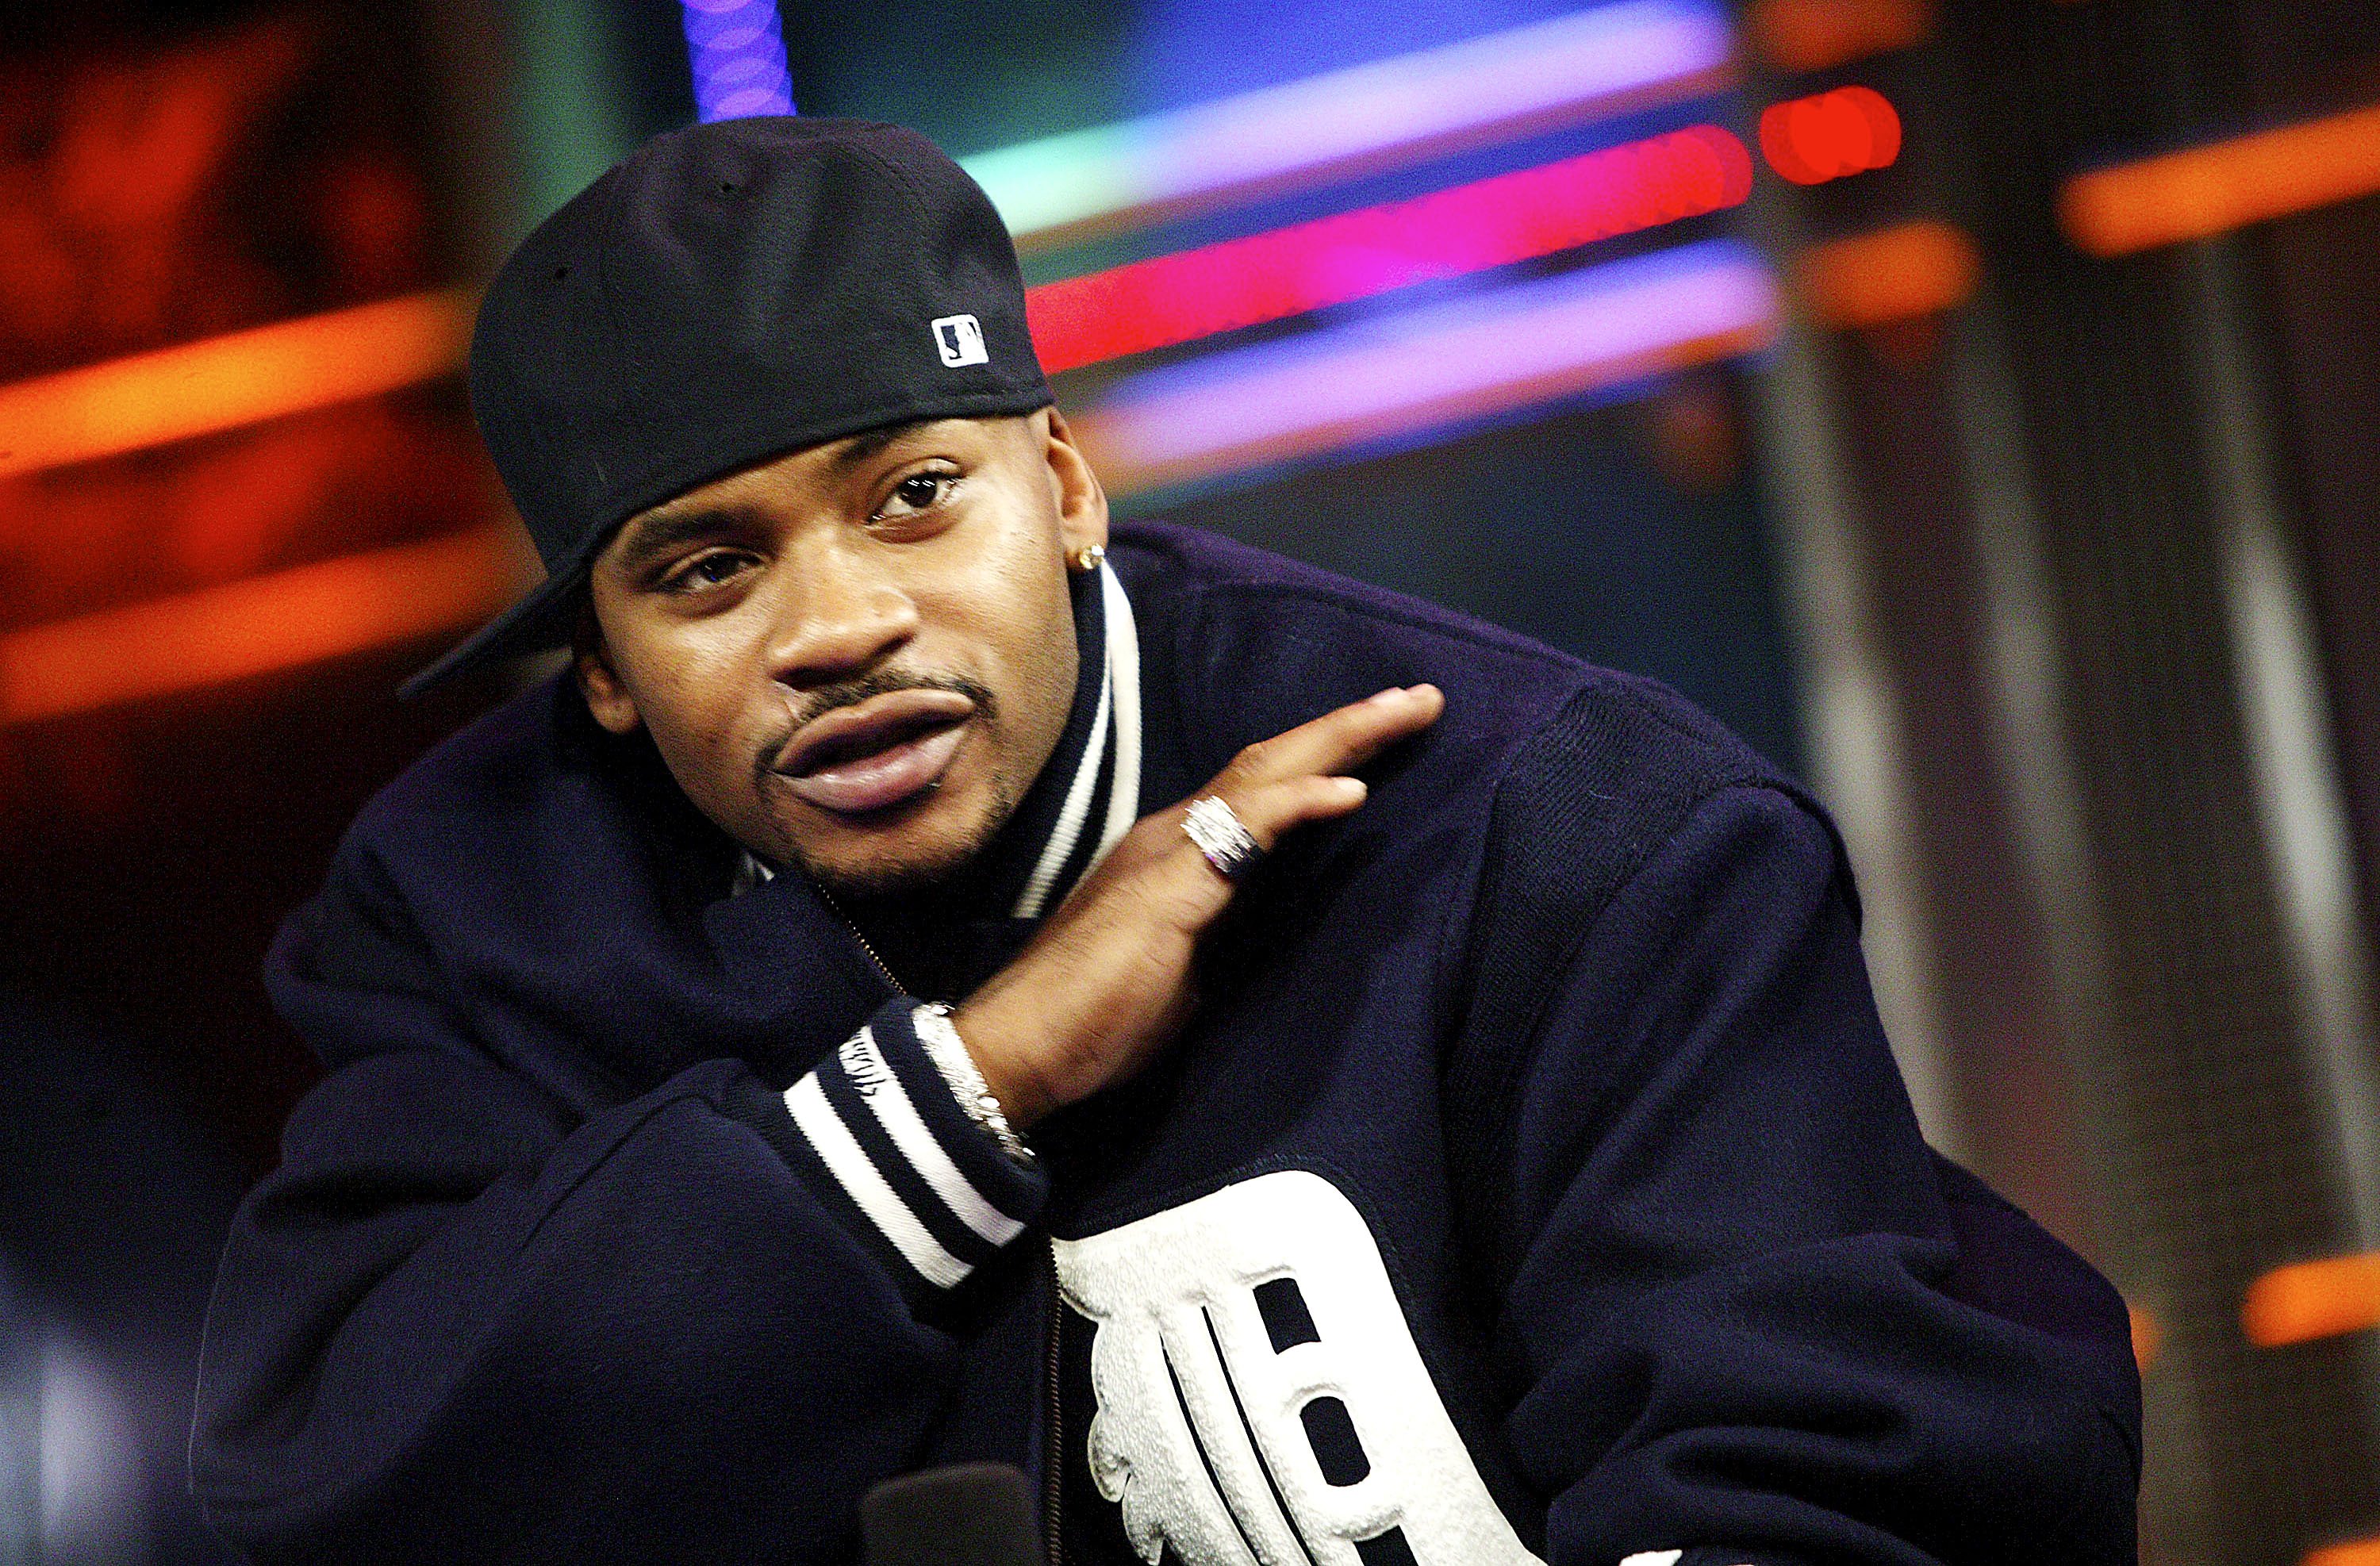 Obie Trice Gets Misdemeanor In Shooting Of Girlfriend’s Son: Report